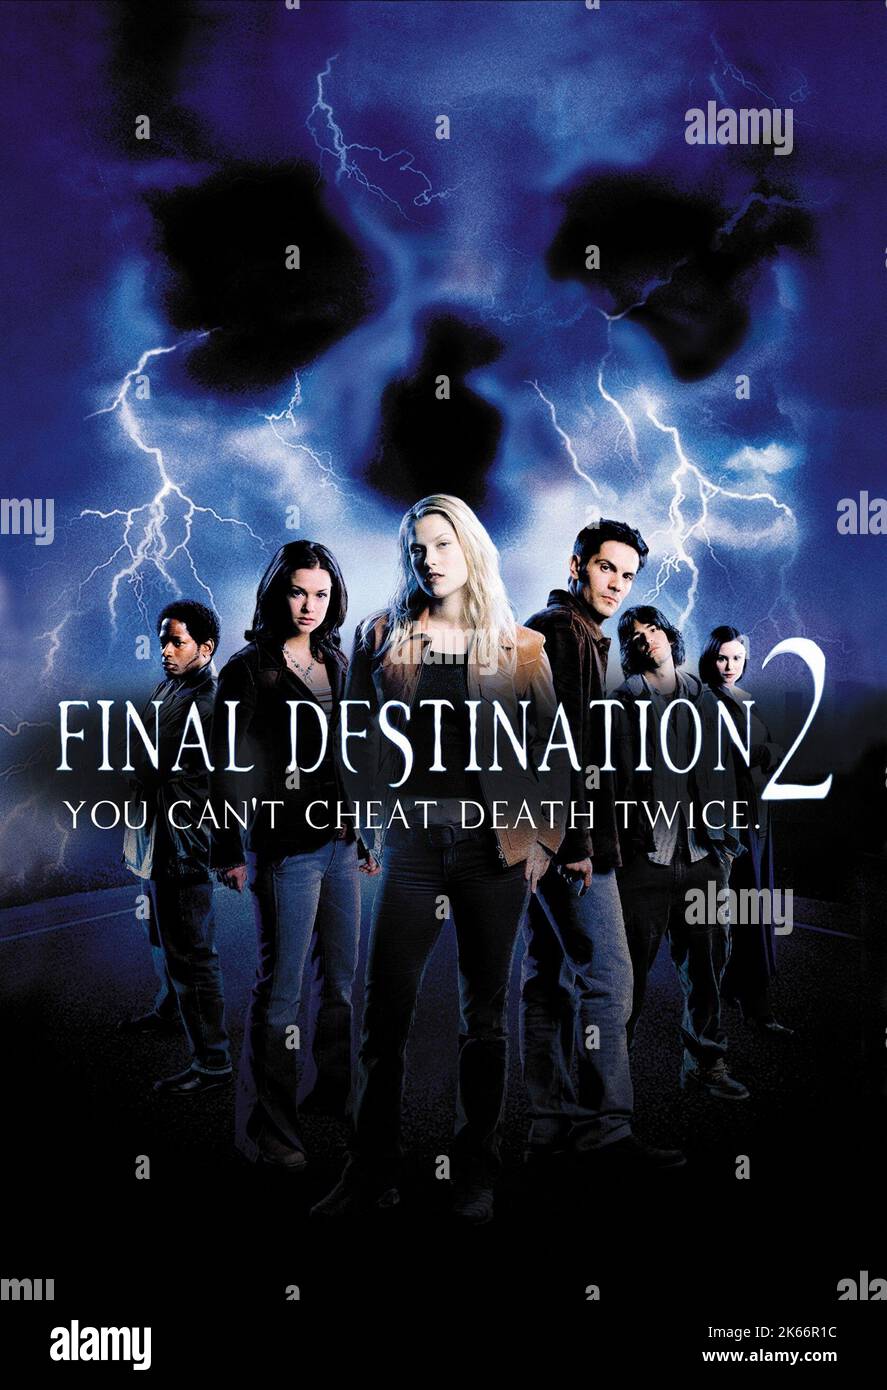 TERRENCE 'T.C.' CARSON, A.J. COOK, ALI LARTER, MICHAEL LANDES, JONATHAN CHERRY, KEEGAN CONNOR TRACY POSTER, FINAL DESTINATION 2, 2003 Stock Photo